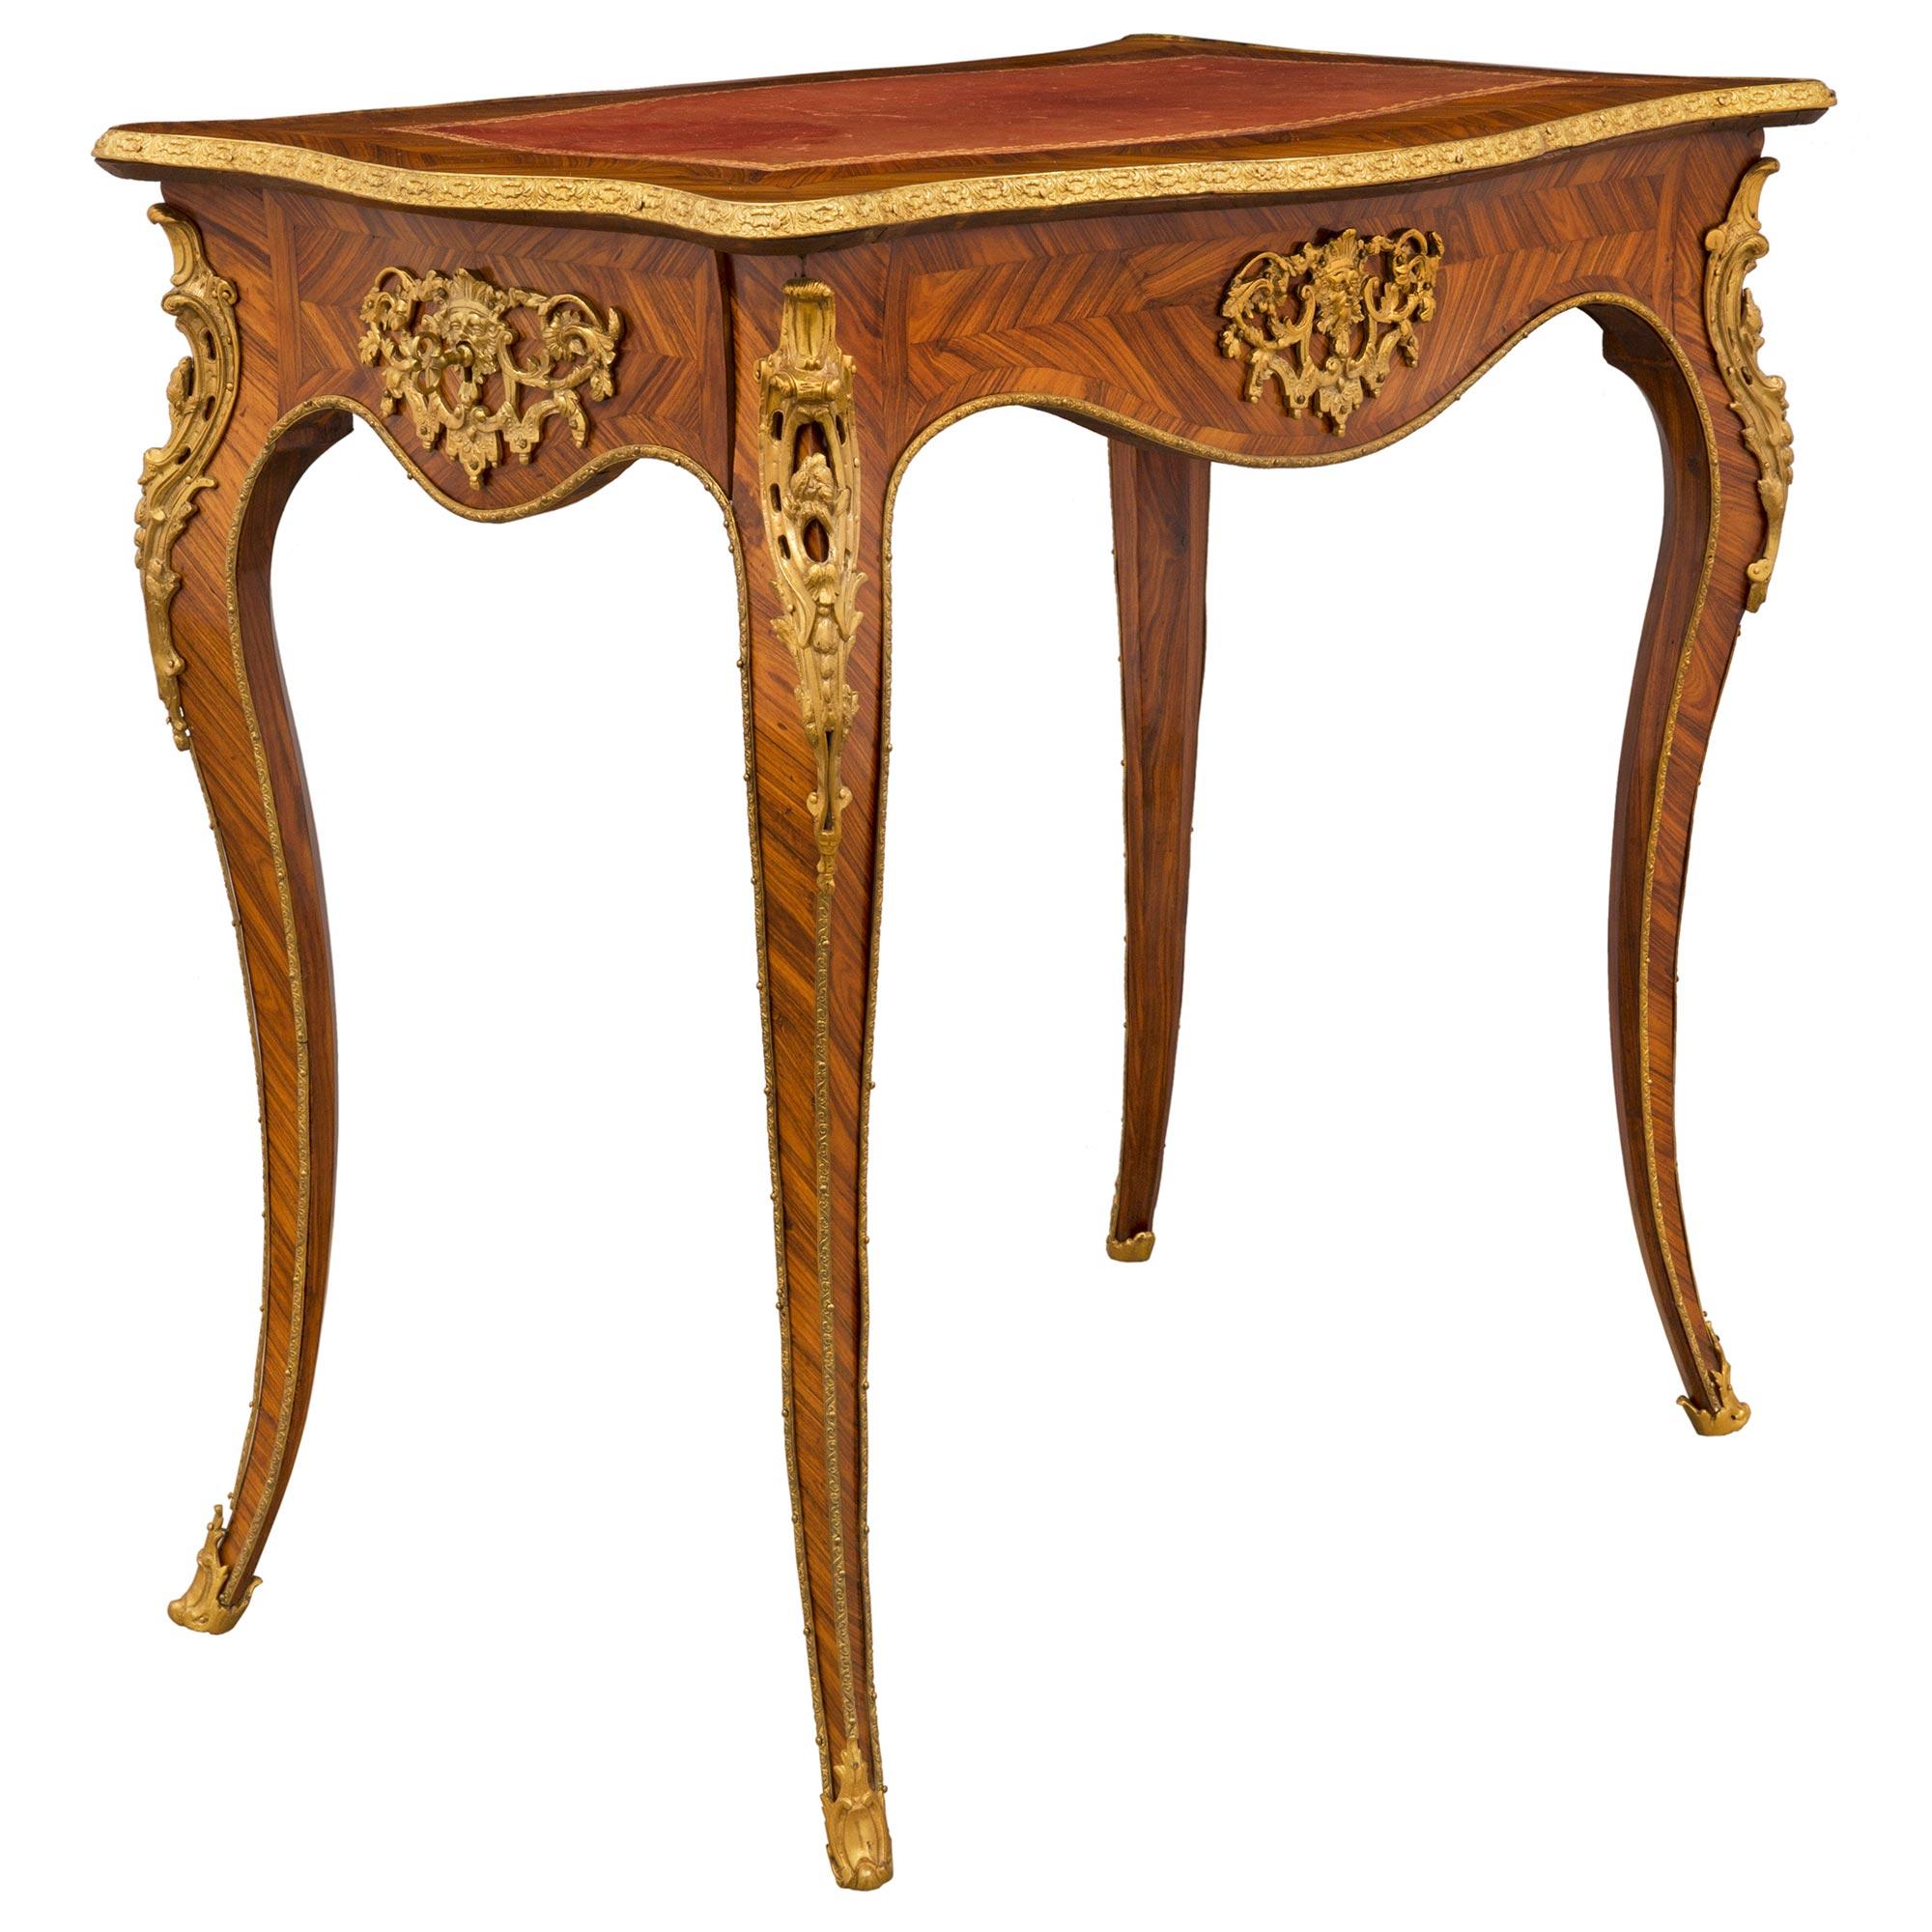 French Louis XV St. 19th Century Tulipwood Marquetry Table In Good Condition For Sale In West Palm Beach, FL